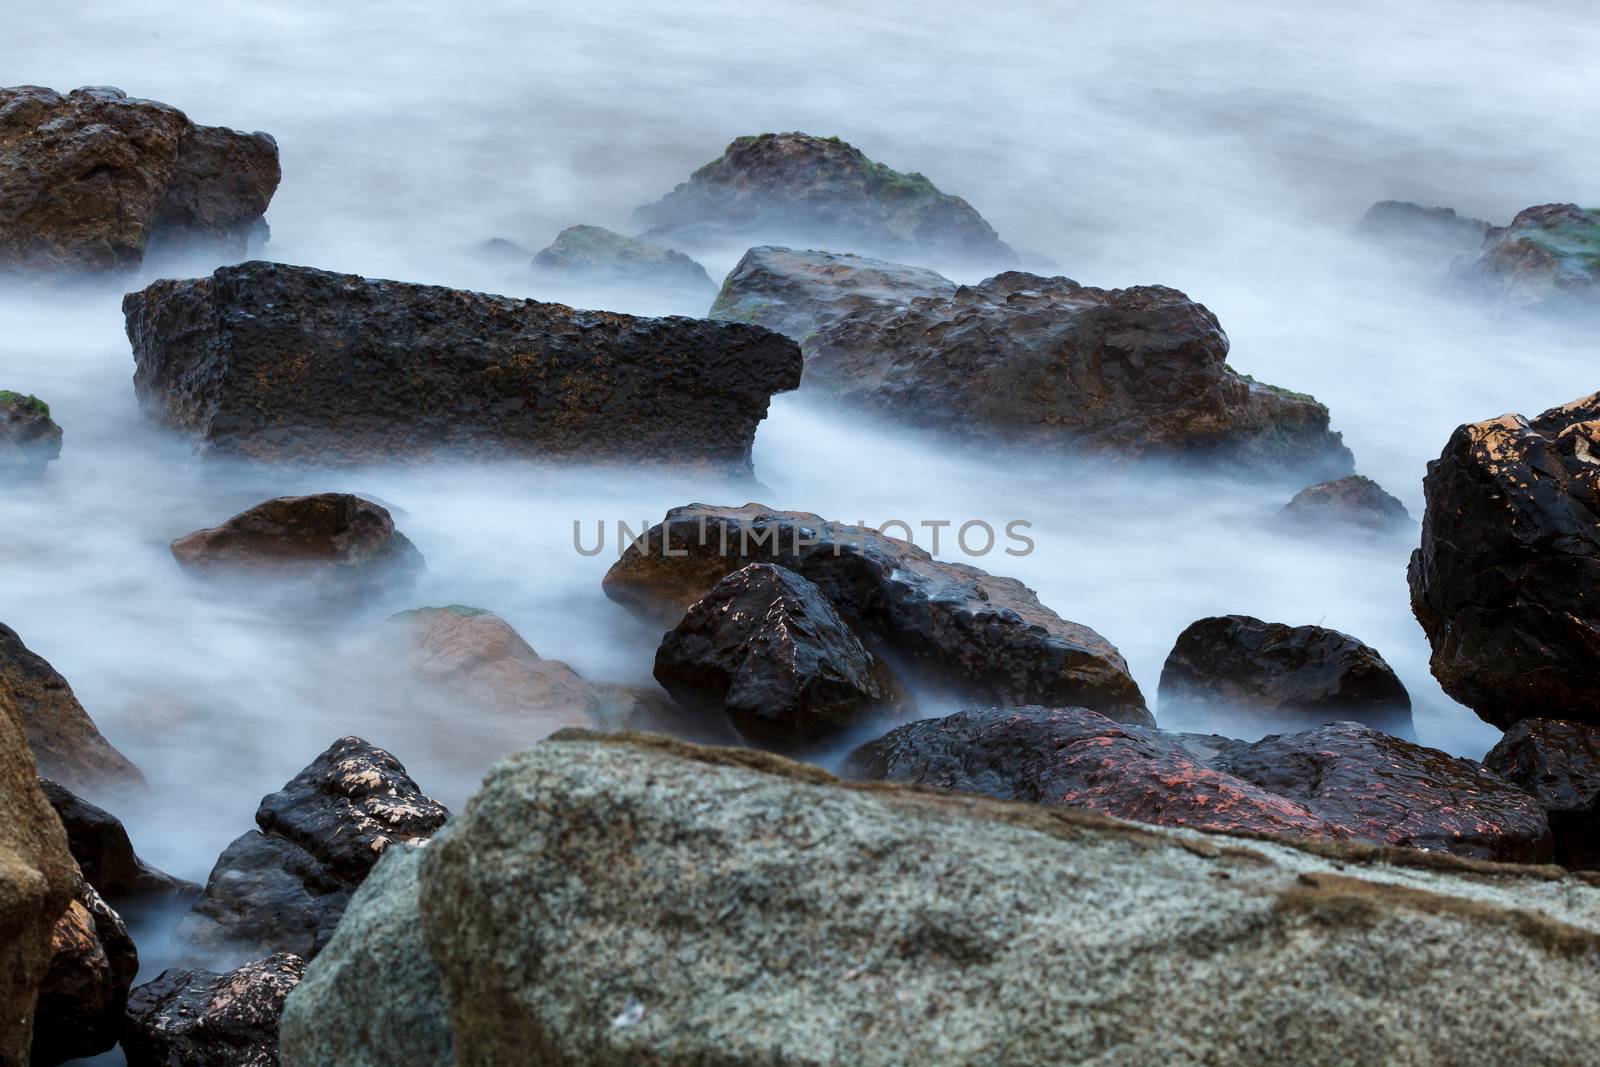 Morning fog over the rocky shore of the sea